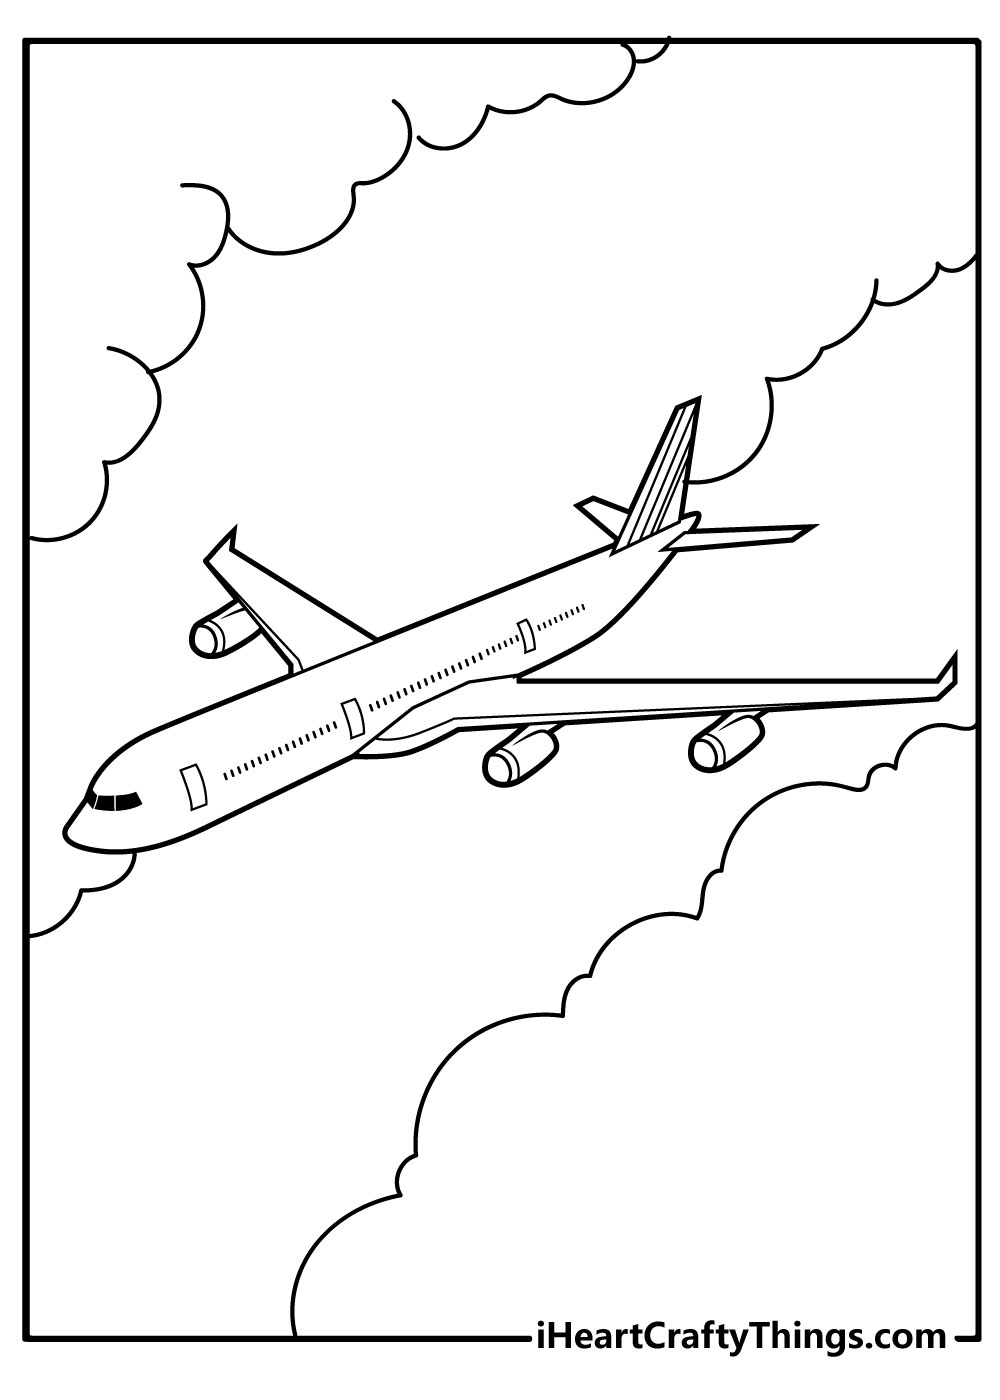 Printable Airplane Coloring Pages Updated 18